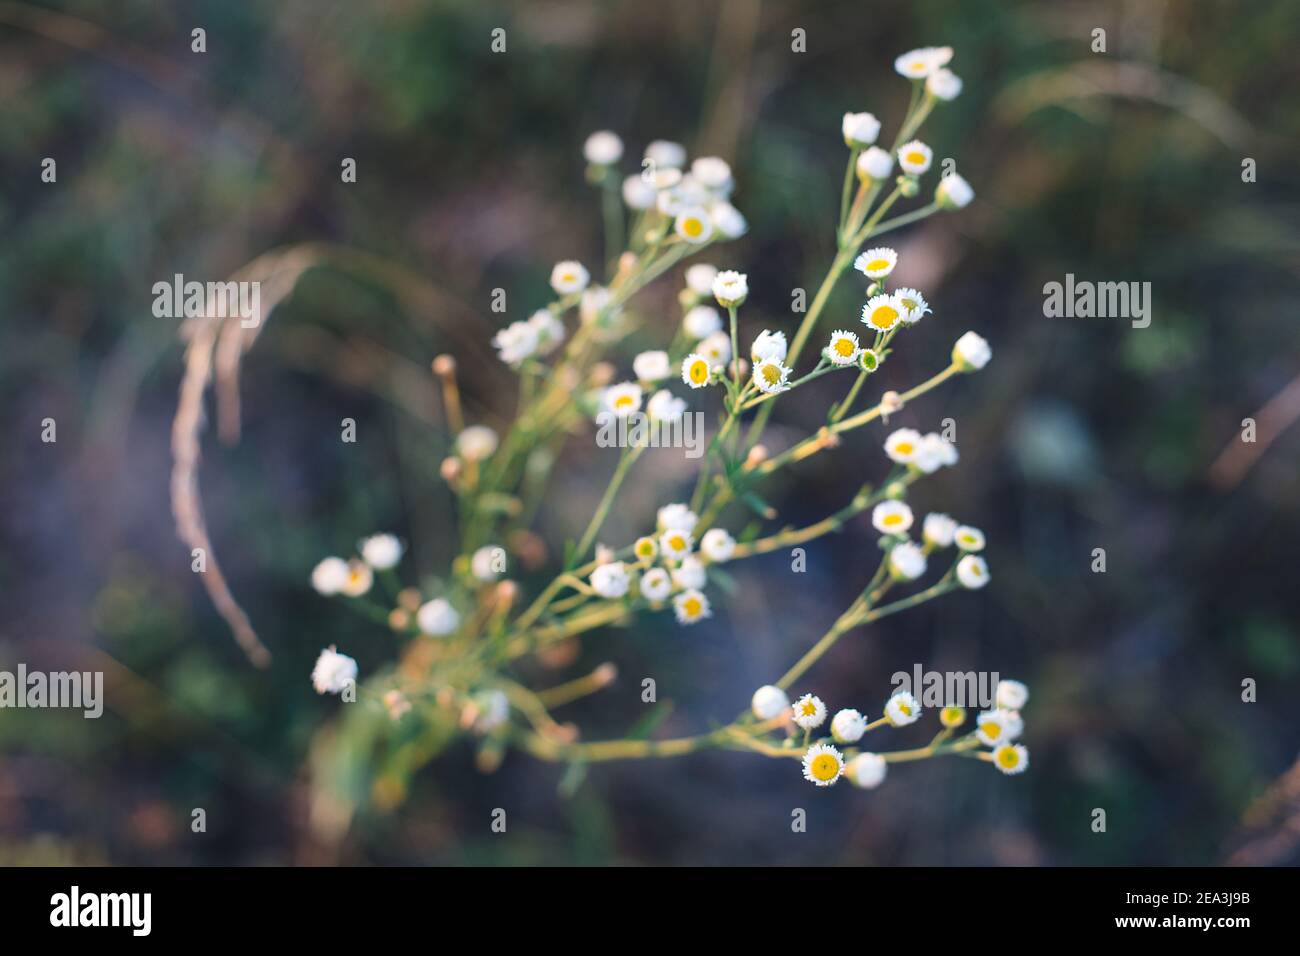 young flowers of a plant from the genus Erigeron. Concept of botany and folk medicine Stock Photo